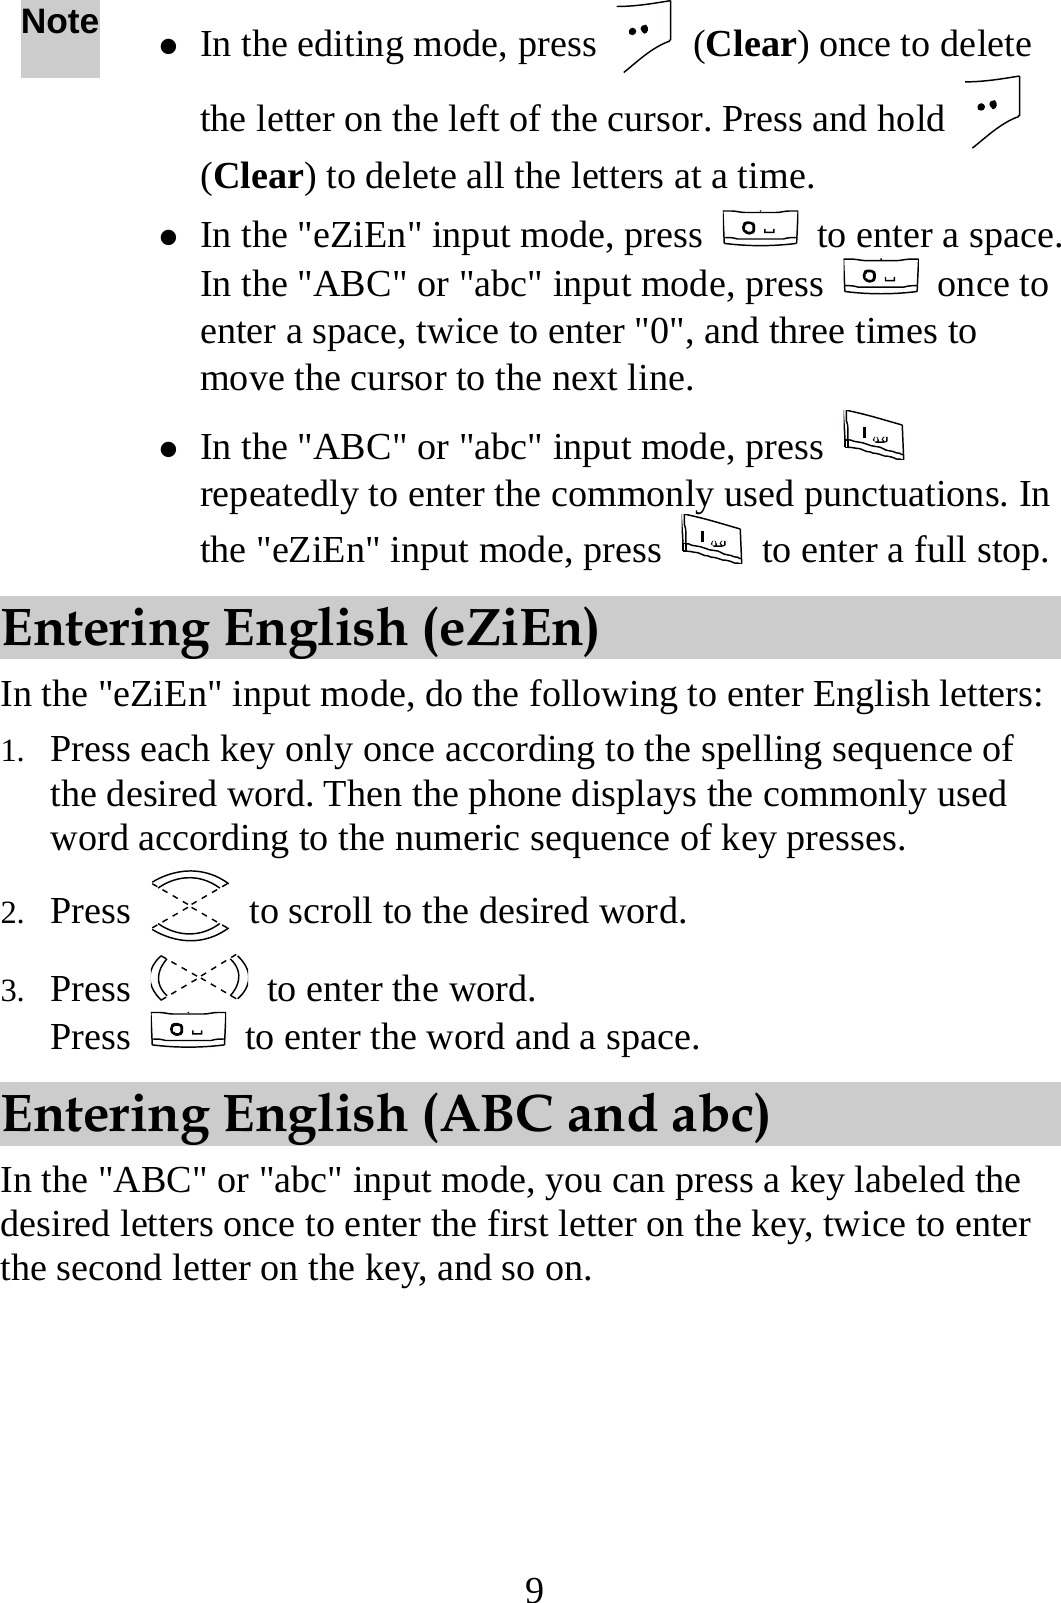 9 Note z In the editing mode, press   (Clear) once to delete the letter on the left of the cursor. Press and hold   (Clear) to delete all the letters at a time. z In the &quot;eZiEn&quot; input mode, press   to enter a space. In the &quot;ABC&quot; or &quot;abc&quot; input mode, press   once to enter a space, twice to enter &quot;0&quot;, and three times to move the cursor to the next line. z In the &quot;ABC&quot; or &quot;abc&quot; input mode, press   repeatedly to enter the commonly used punctuations. In the &quot;eZiEn&quot; input mode, press    to enter a full stop.Entering English (eZiEn) In the &quot;eZiEn&quot; input mode, do the following to enter English letters: 1. Press each key only once according to the spelling sequence of the desired word. Then the phone displays the commonly used word according to the numeric sequence of key presses. 2. Press    to scroll to the desired word. 3. Press   to enter the word. Press    to enter the word and a space. Entering English (ABC and abc) In the &quot;ABC&quot; or &quot;abc&quot; input mode, you can press a key labeled the desired letters once to enter the first letter on the key, twice to enter the second letter on the key, and so on. 